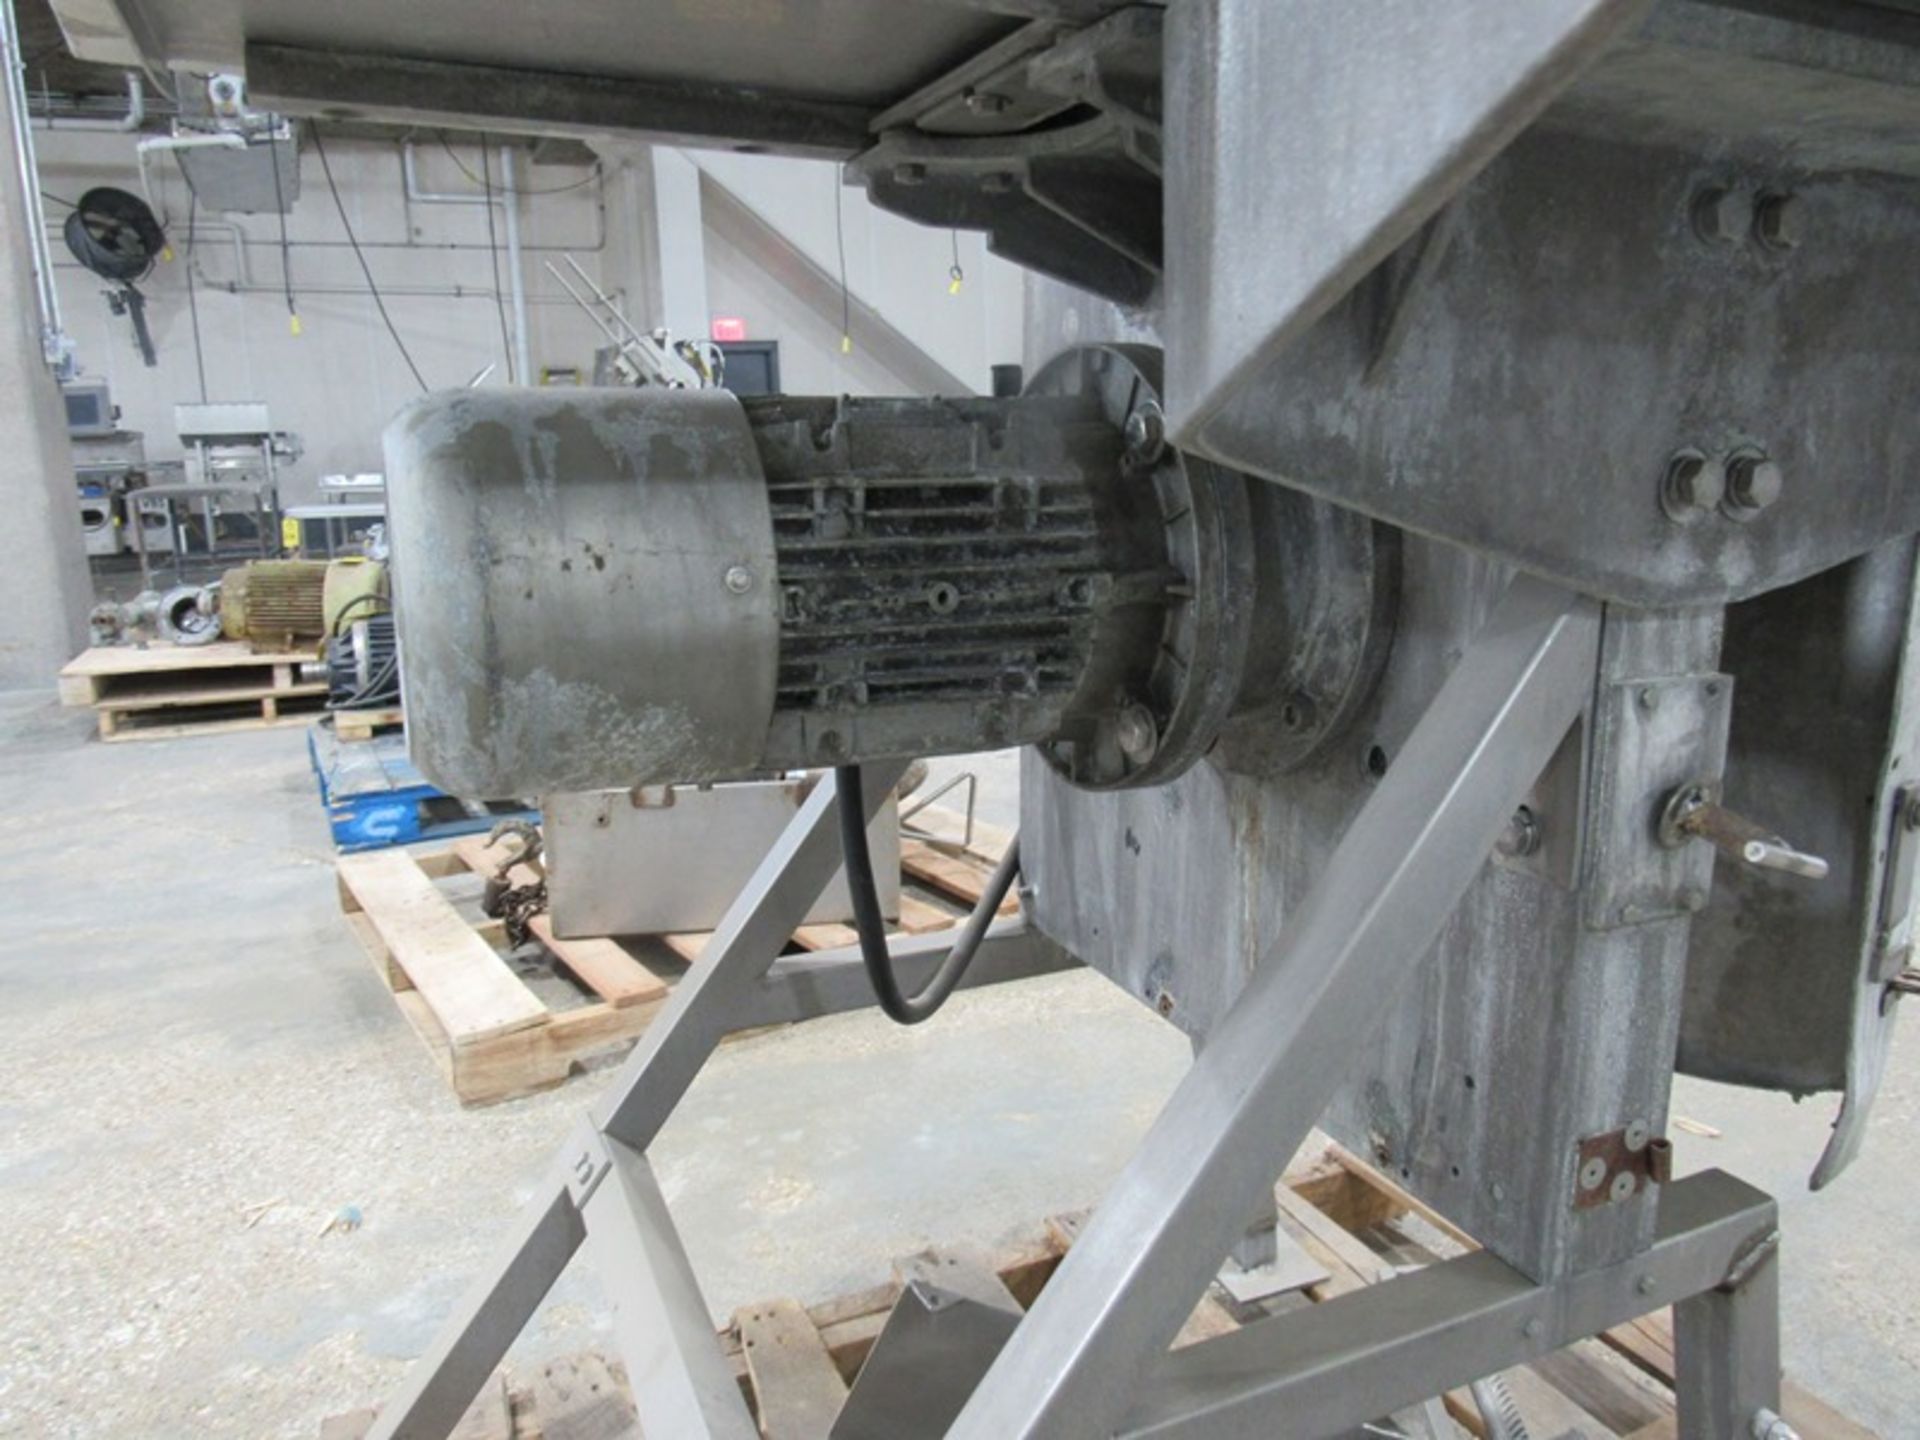 AEW Mdl. 400M Band Saw, Ser. #LHS120585 Removal: By Appointment Only. Required Rigging Fee $50.00. - Image 2 of 4